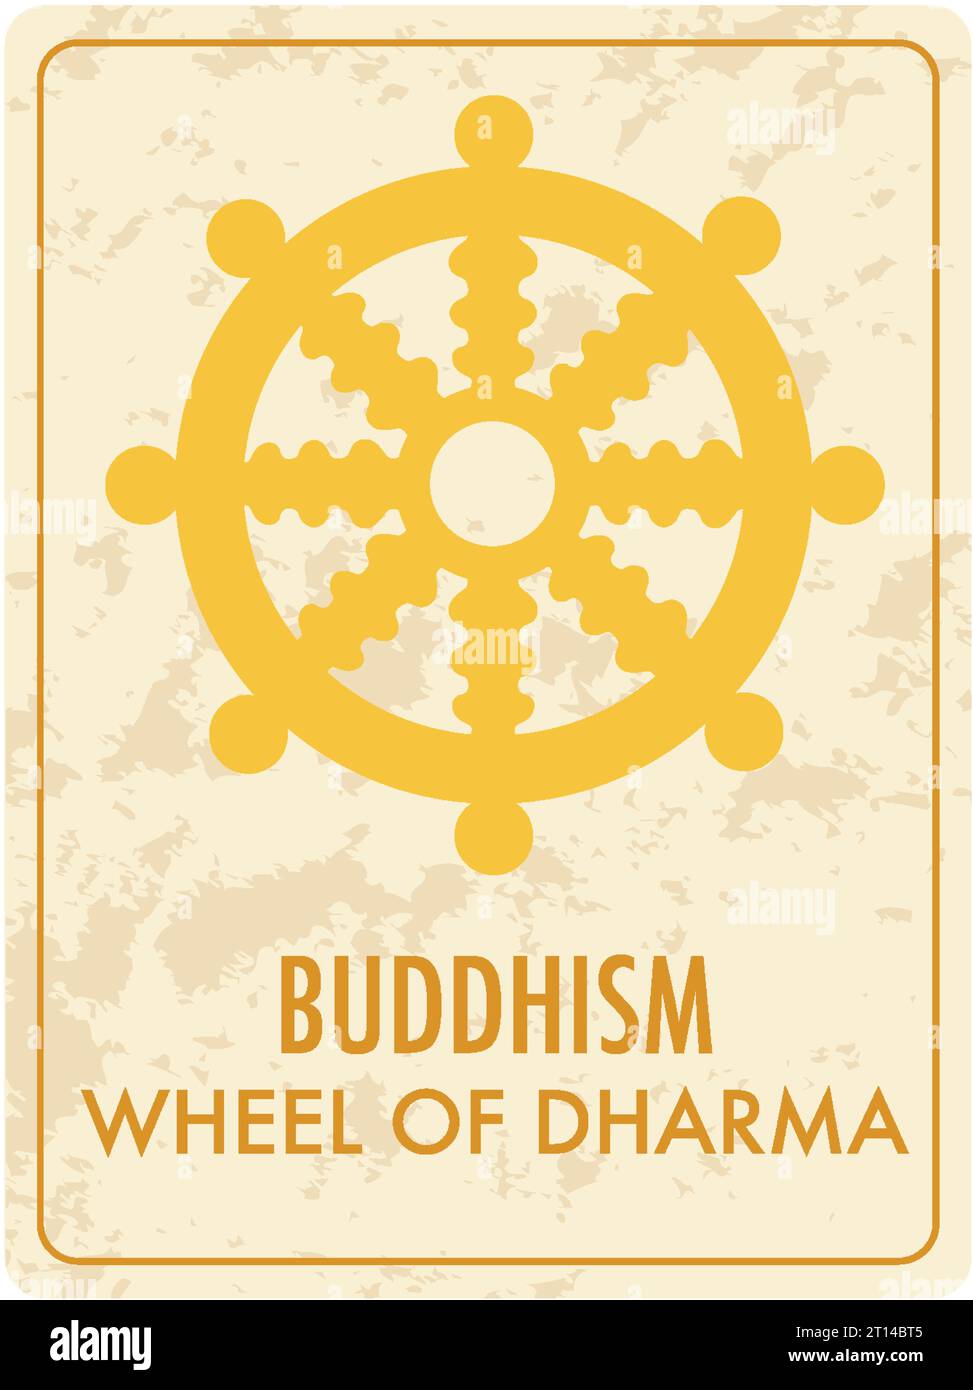 A vibrant yellow card featuring the Wheel of Dharma, a significant Buddhist symbol Stock Vector